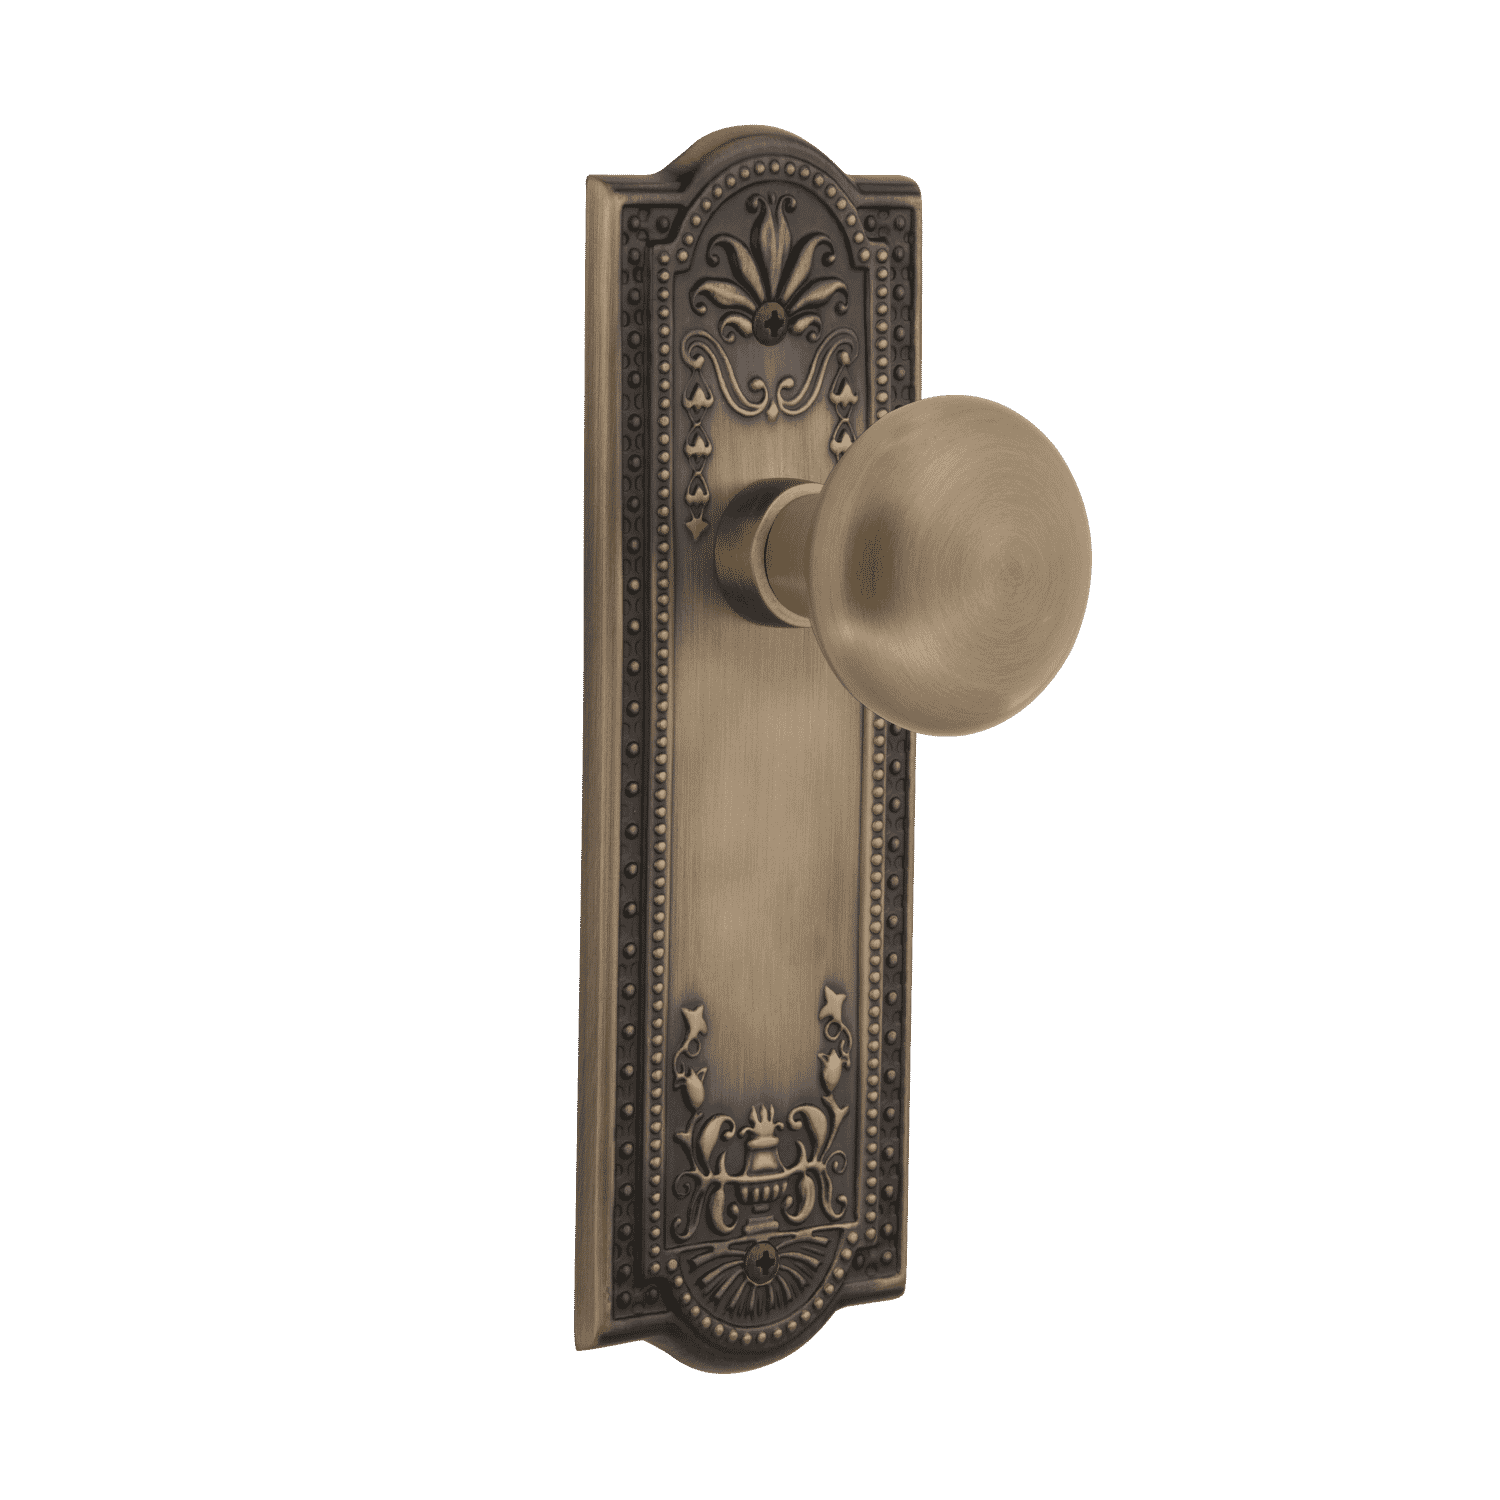 Meadows Long Plate with New York Knob in Antique Brass – Nostalgic